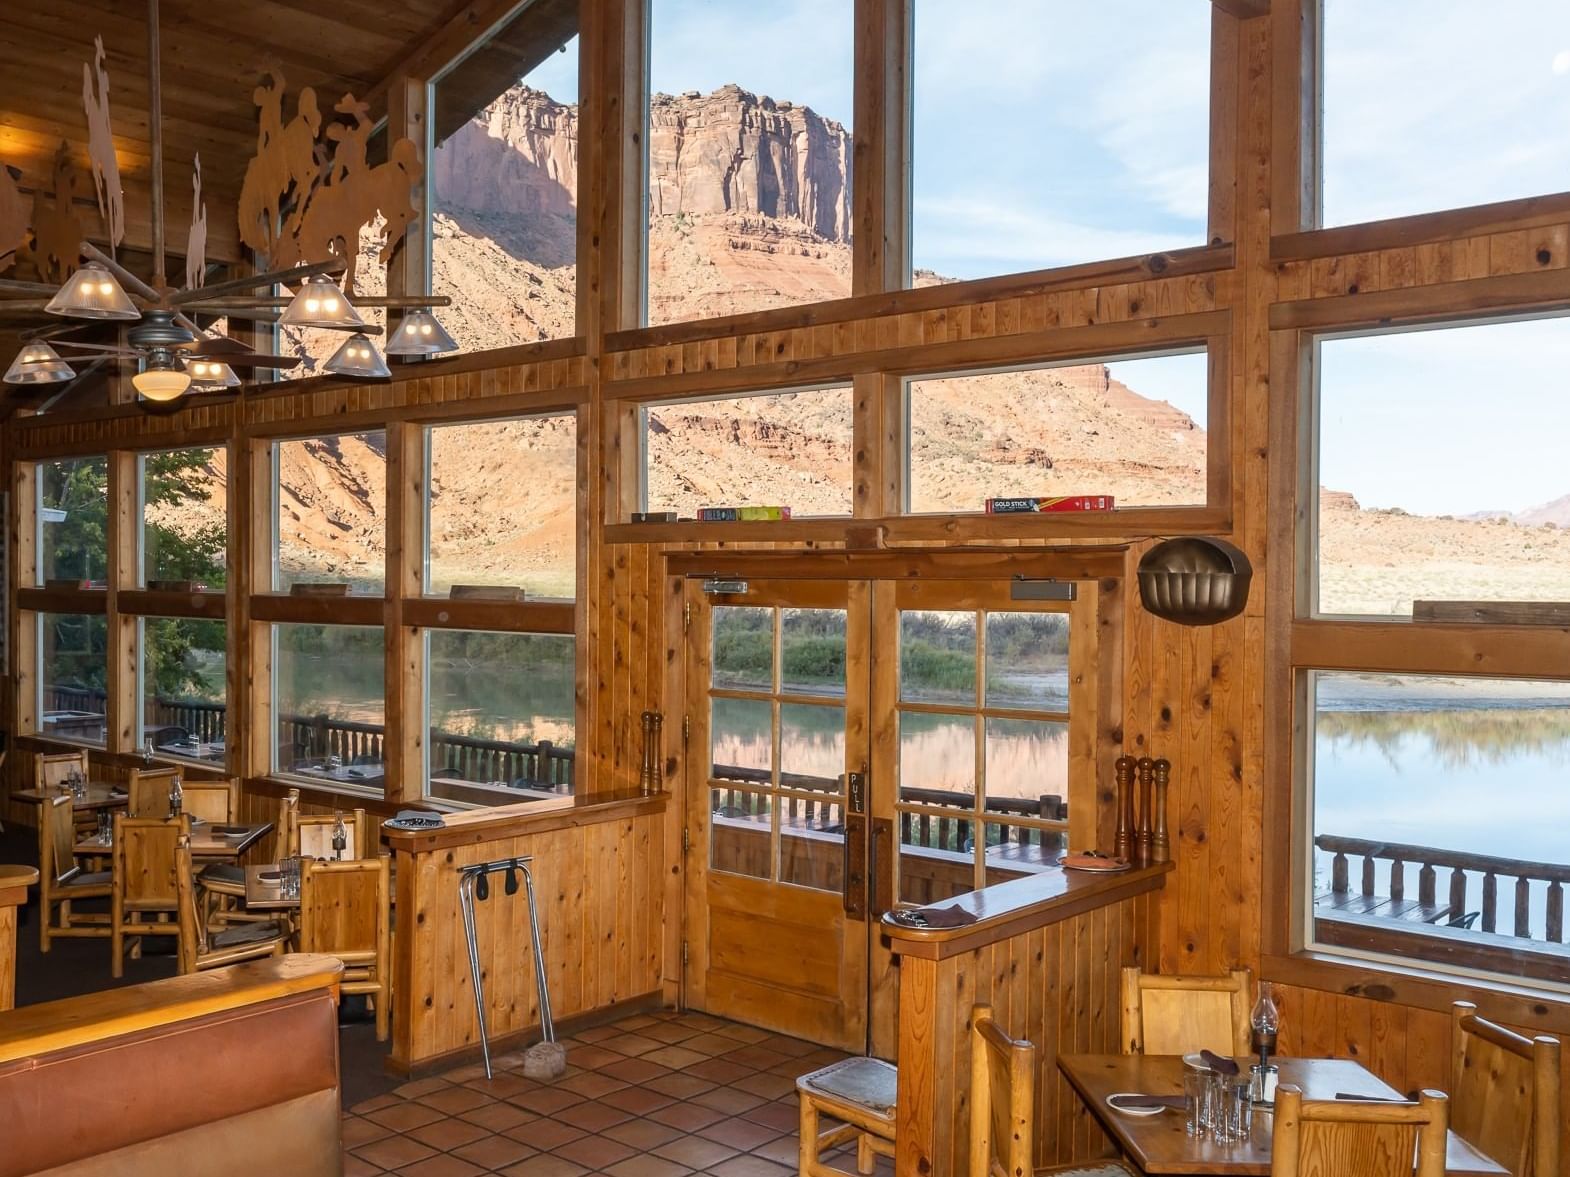 The Cowboy Grill at Red Cliffs Lodge